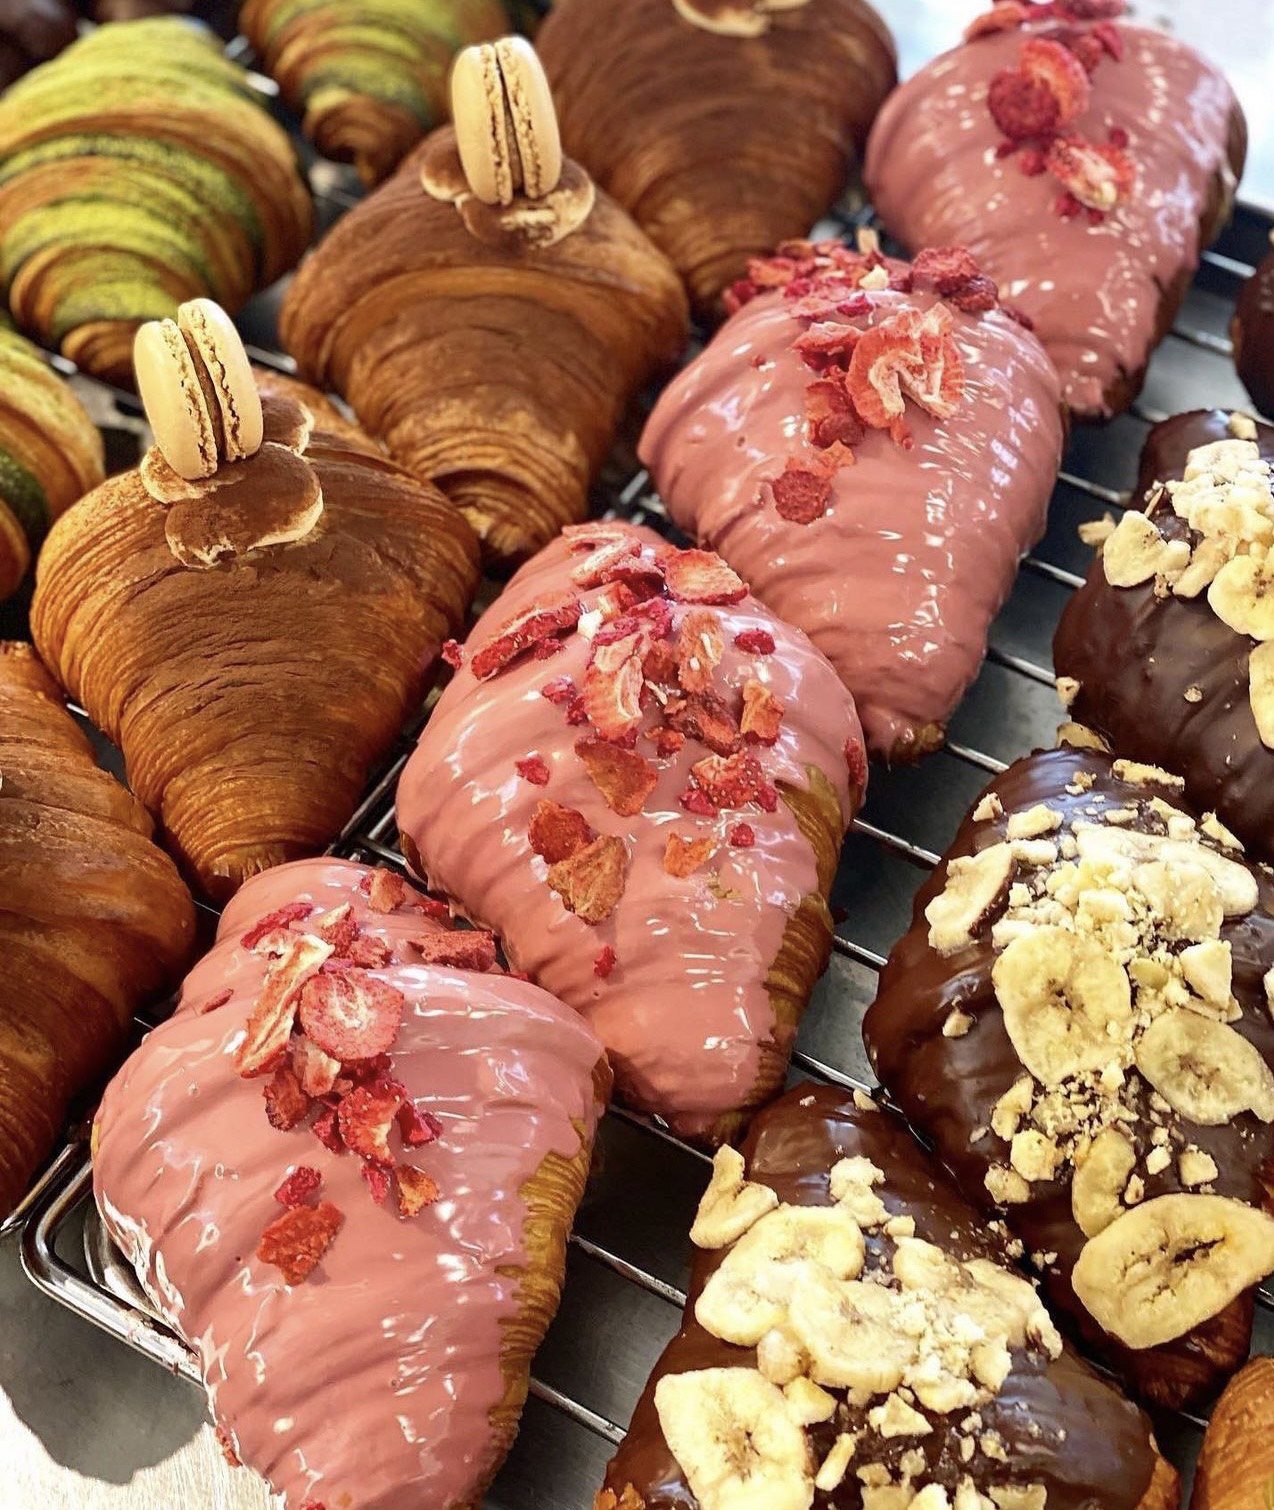 Rows of croissants are topped in a few different ways, with some completely covered in pink glaze, others in chocolate with banana chips, and more.